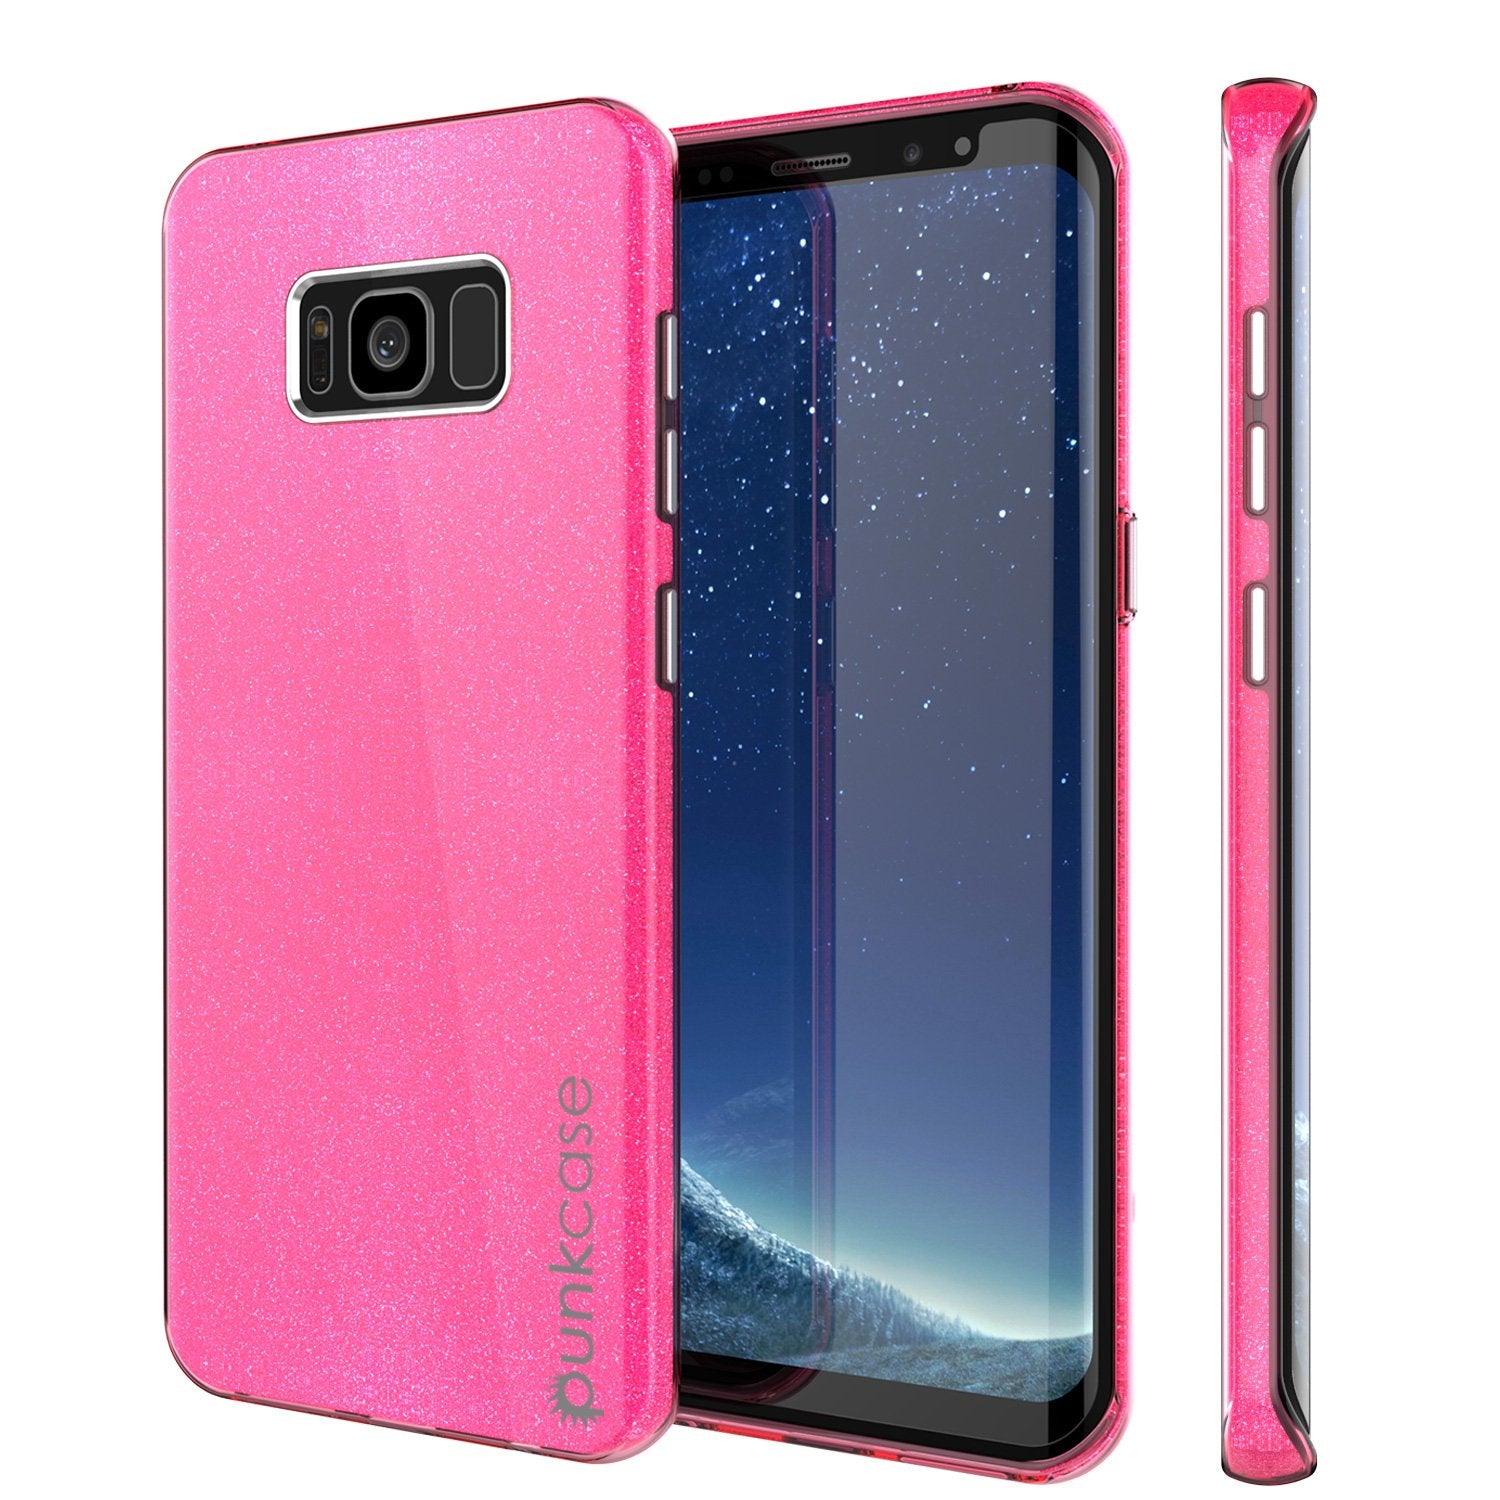 Galaxy S8 Case, Punkcase Galactic 2.0 Series Ultra Slim Protective Armor Cover [Pink]